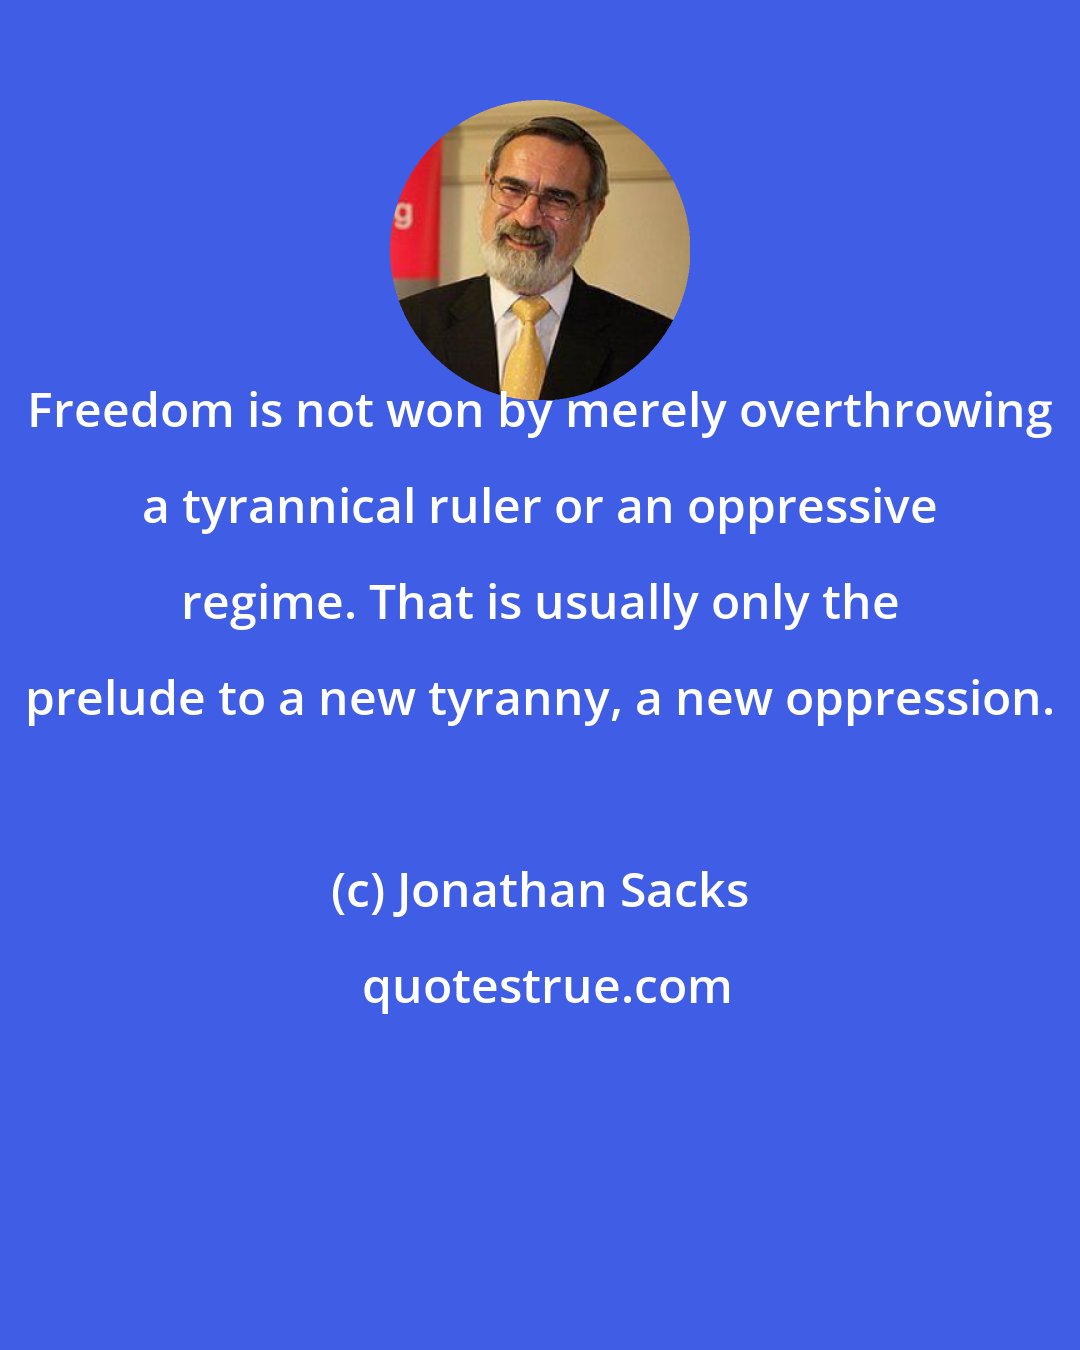 Jonathan Sacks: Freedom is not won by merely overthrowing a tyrannical ruler or an oppressive regime. That is usually only the prelude to a new tyranny, a new oppression.